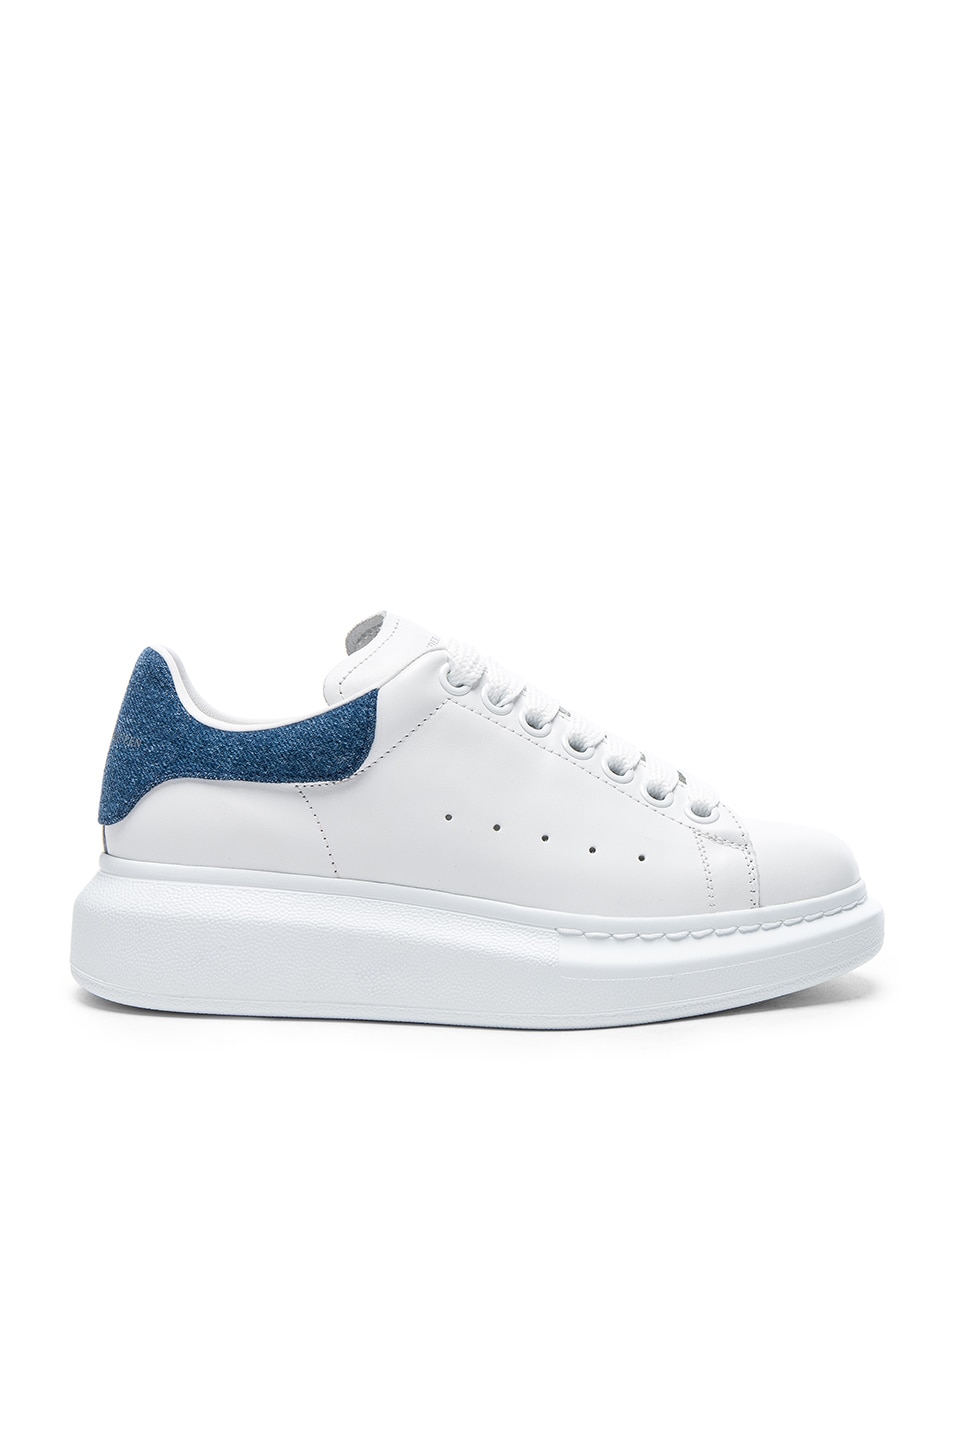 Image 1 of Alexander McQueen Leather Platform Lace Up Sneakers in White & Denim